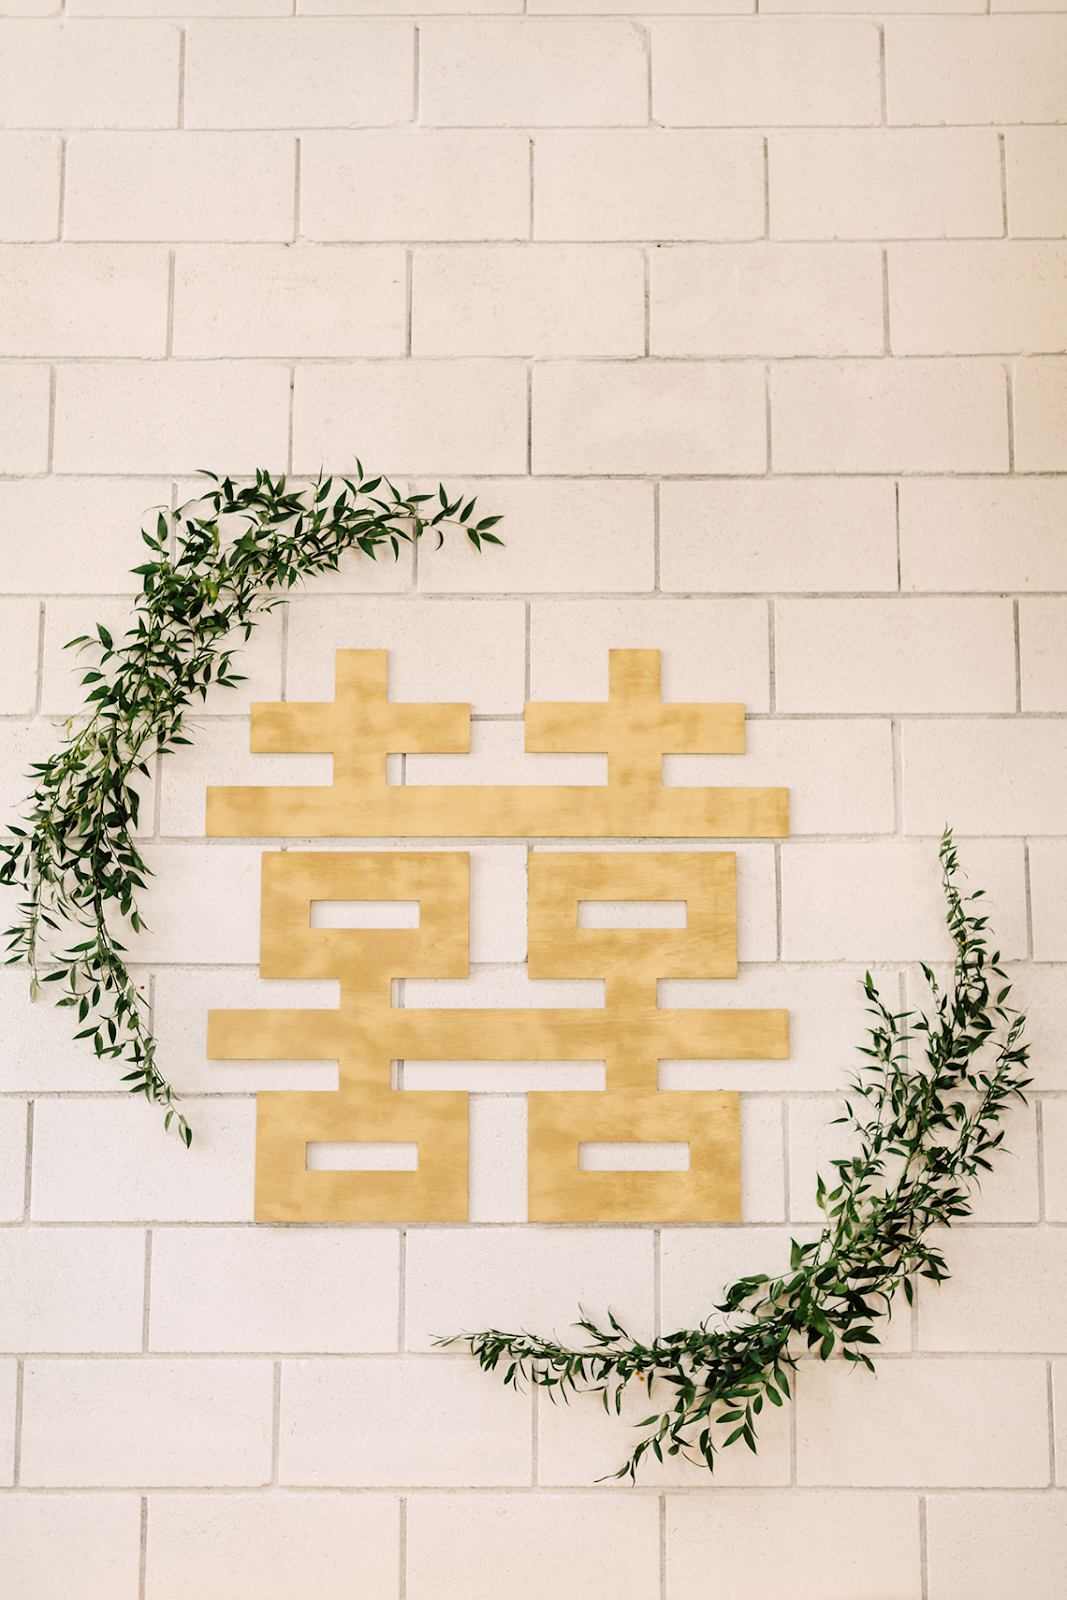 The double happiness sign is a sign that can always be seen in Chinese weddings.